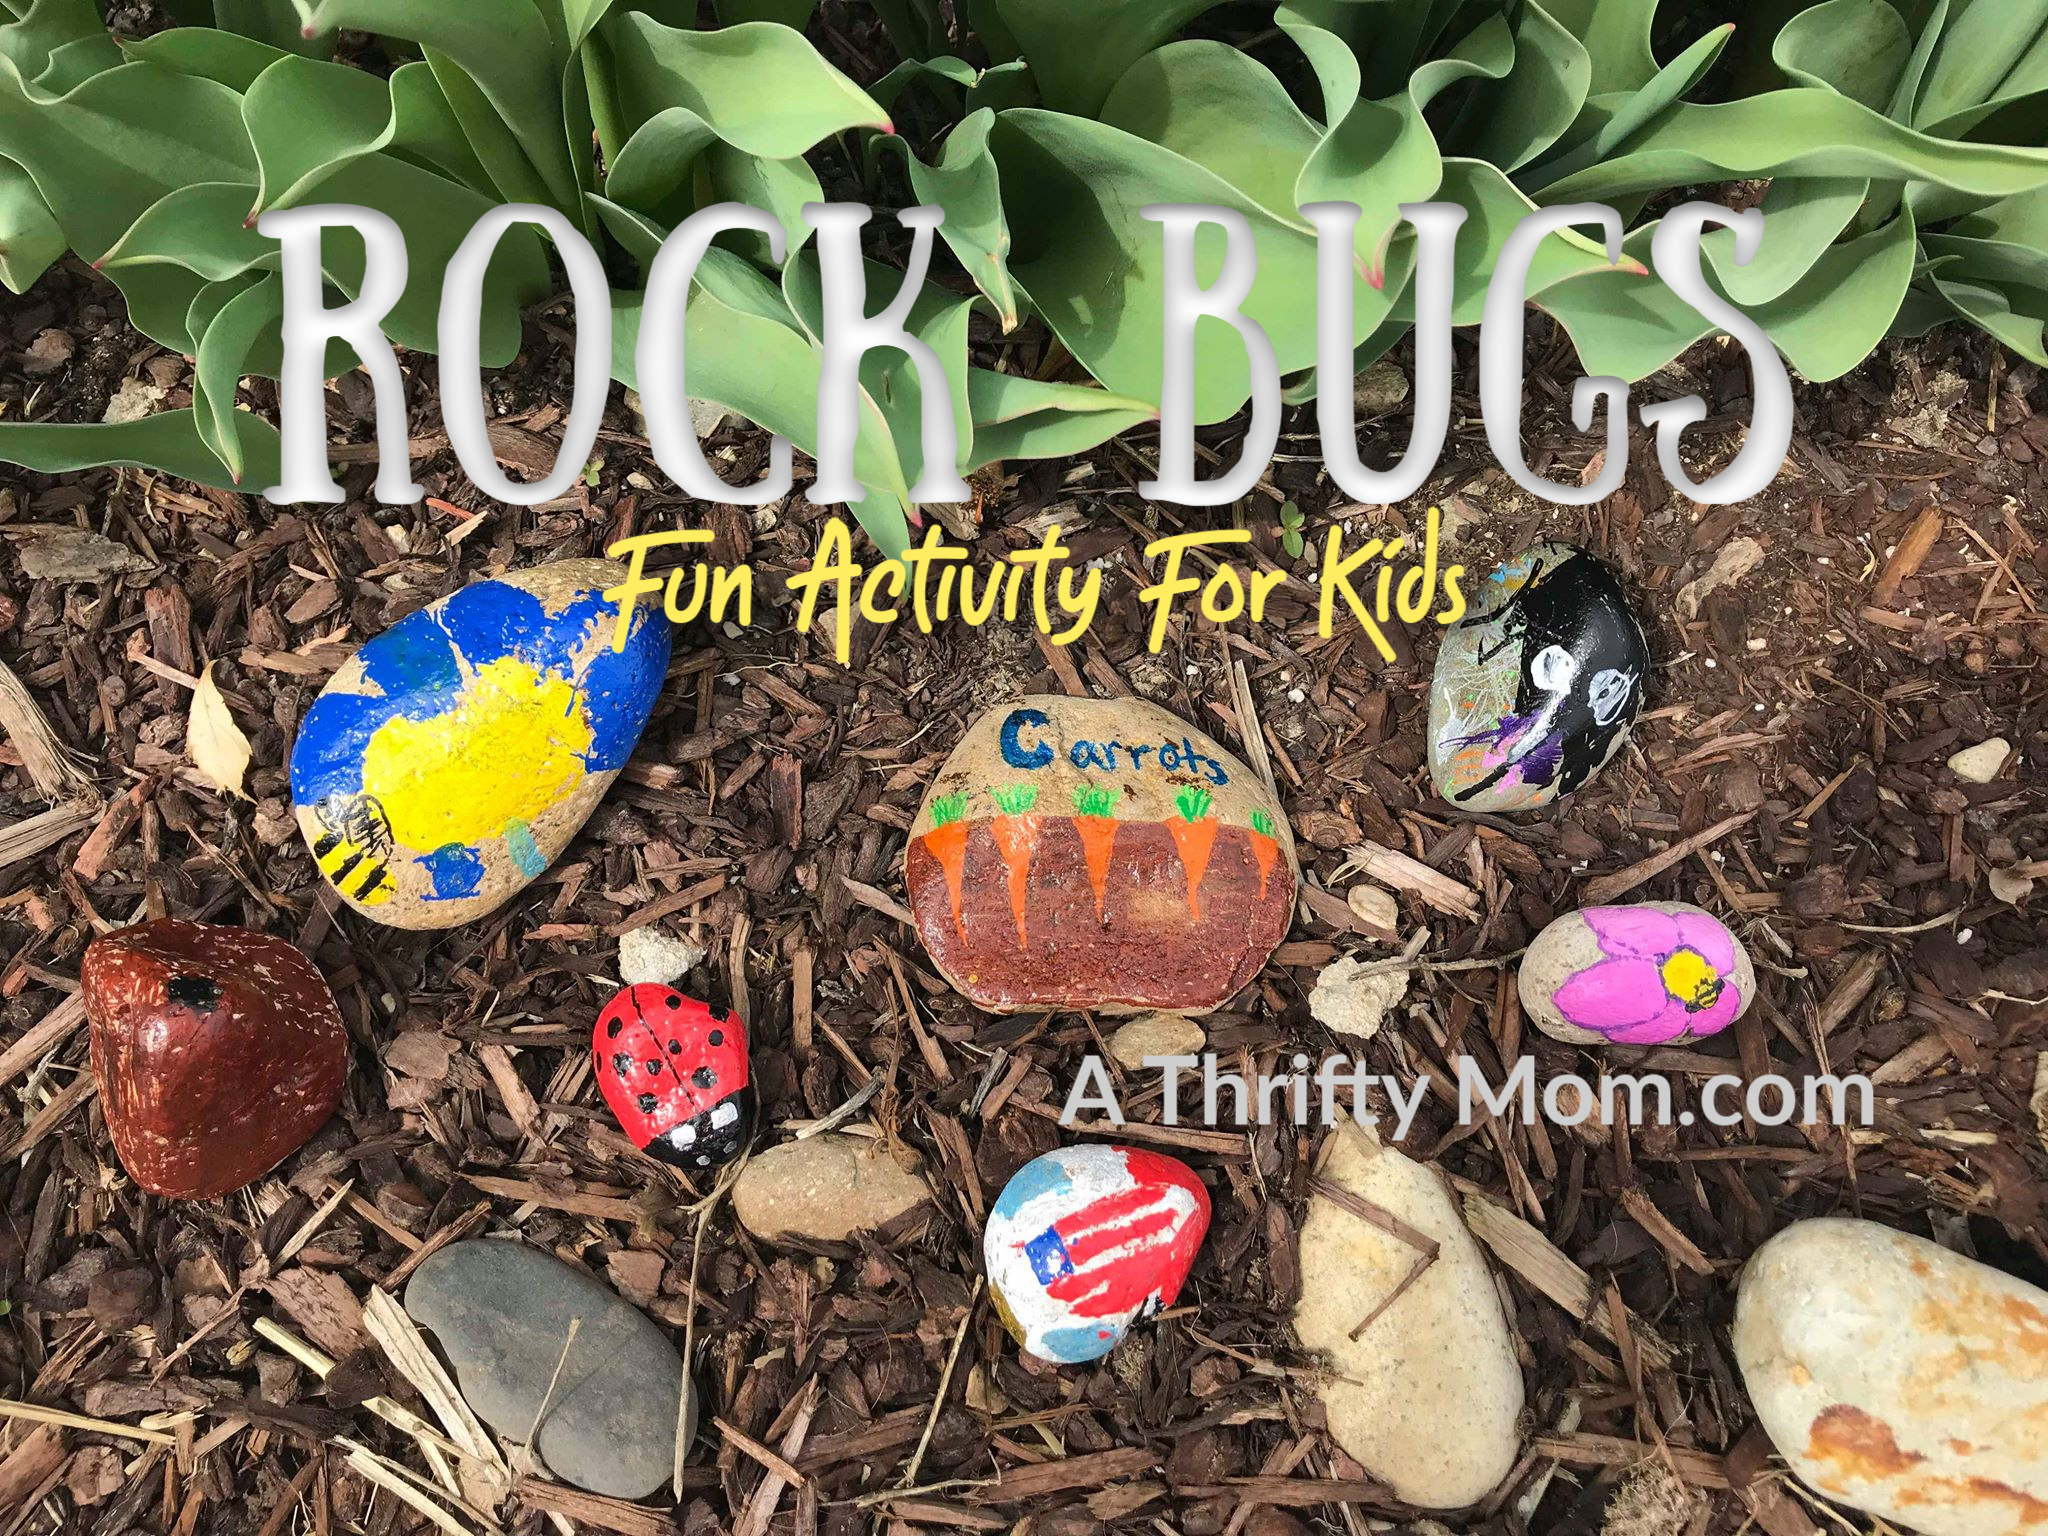 Blogger&#x27;s photo of various bugs painted on rocks